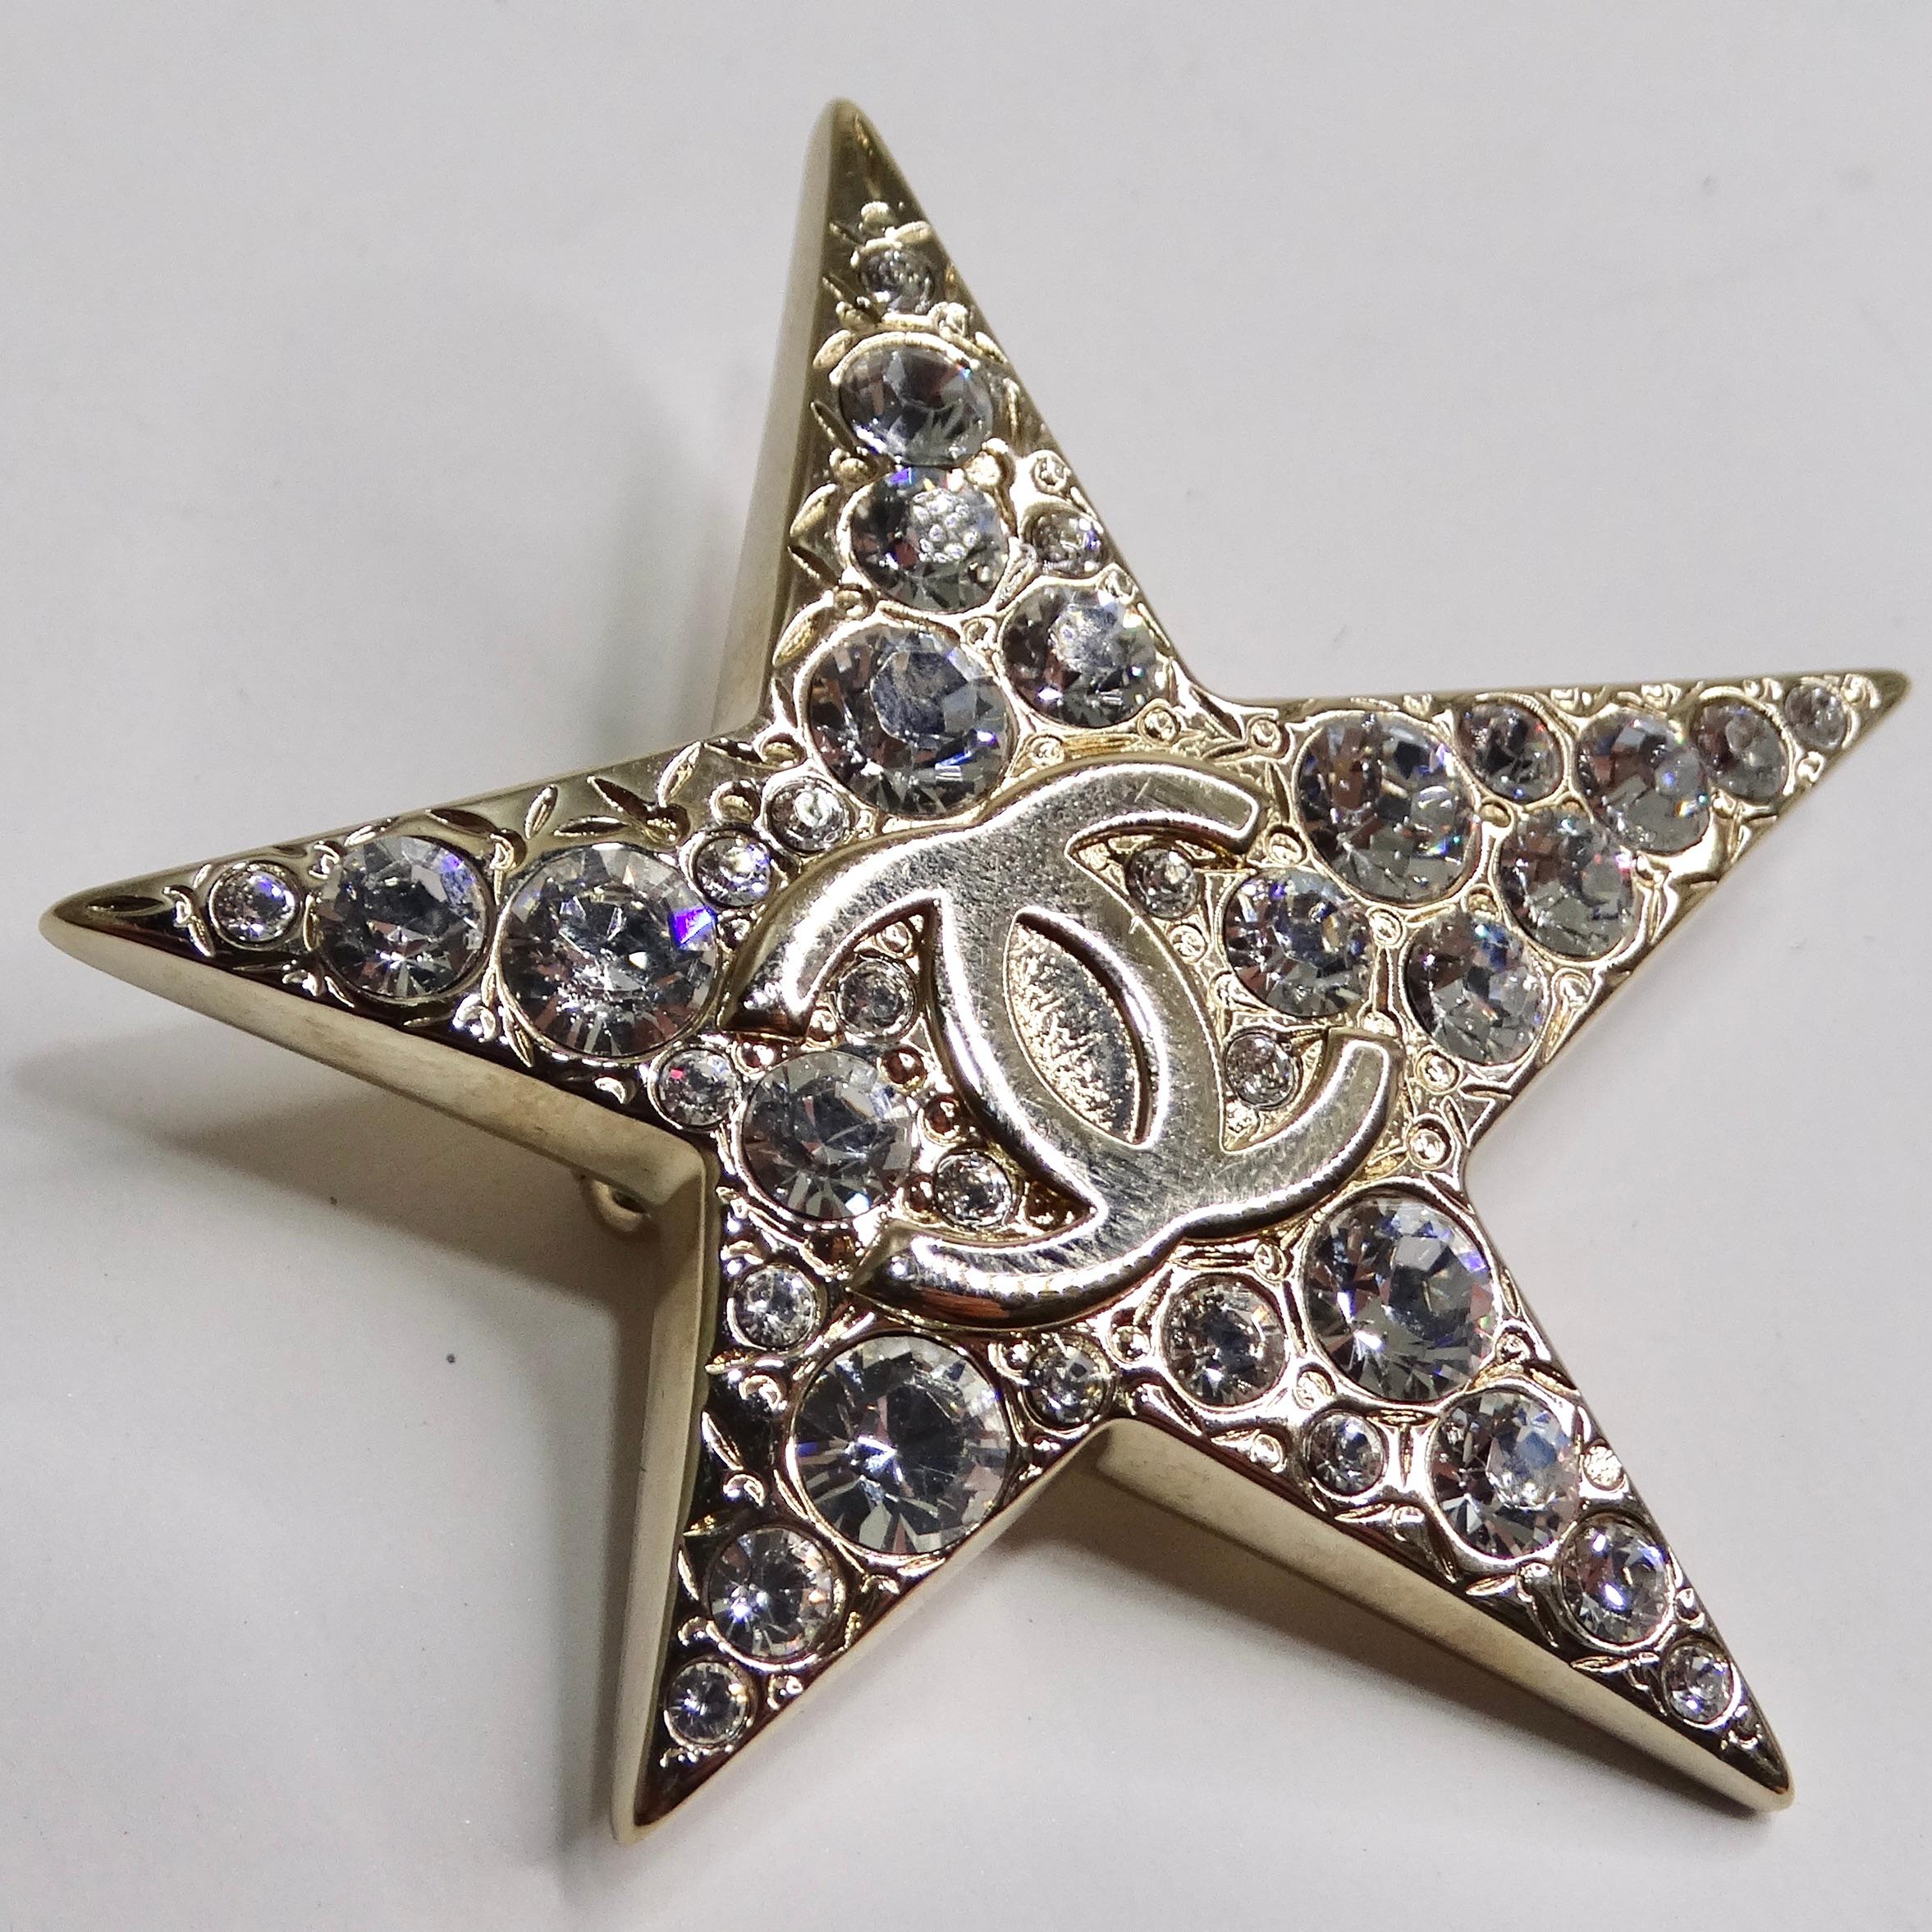 Introducing the Chanel 1994 Comet Brooch - A Dazzling Starburst of Elegance and Vintage Glamour! This vintage Chanel brooch is a testament to the brand's timeless elegance and creativity. The star-shaped design showcases a stunning Chanel CC logo at